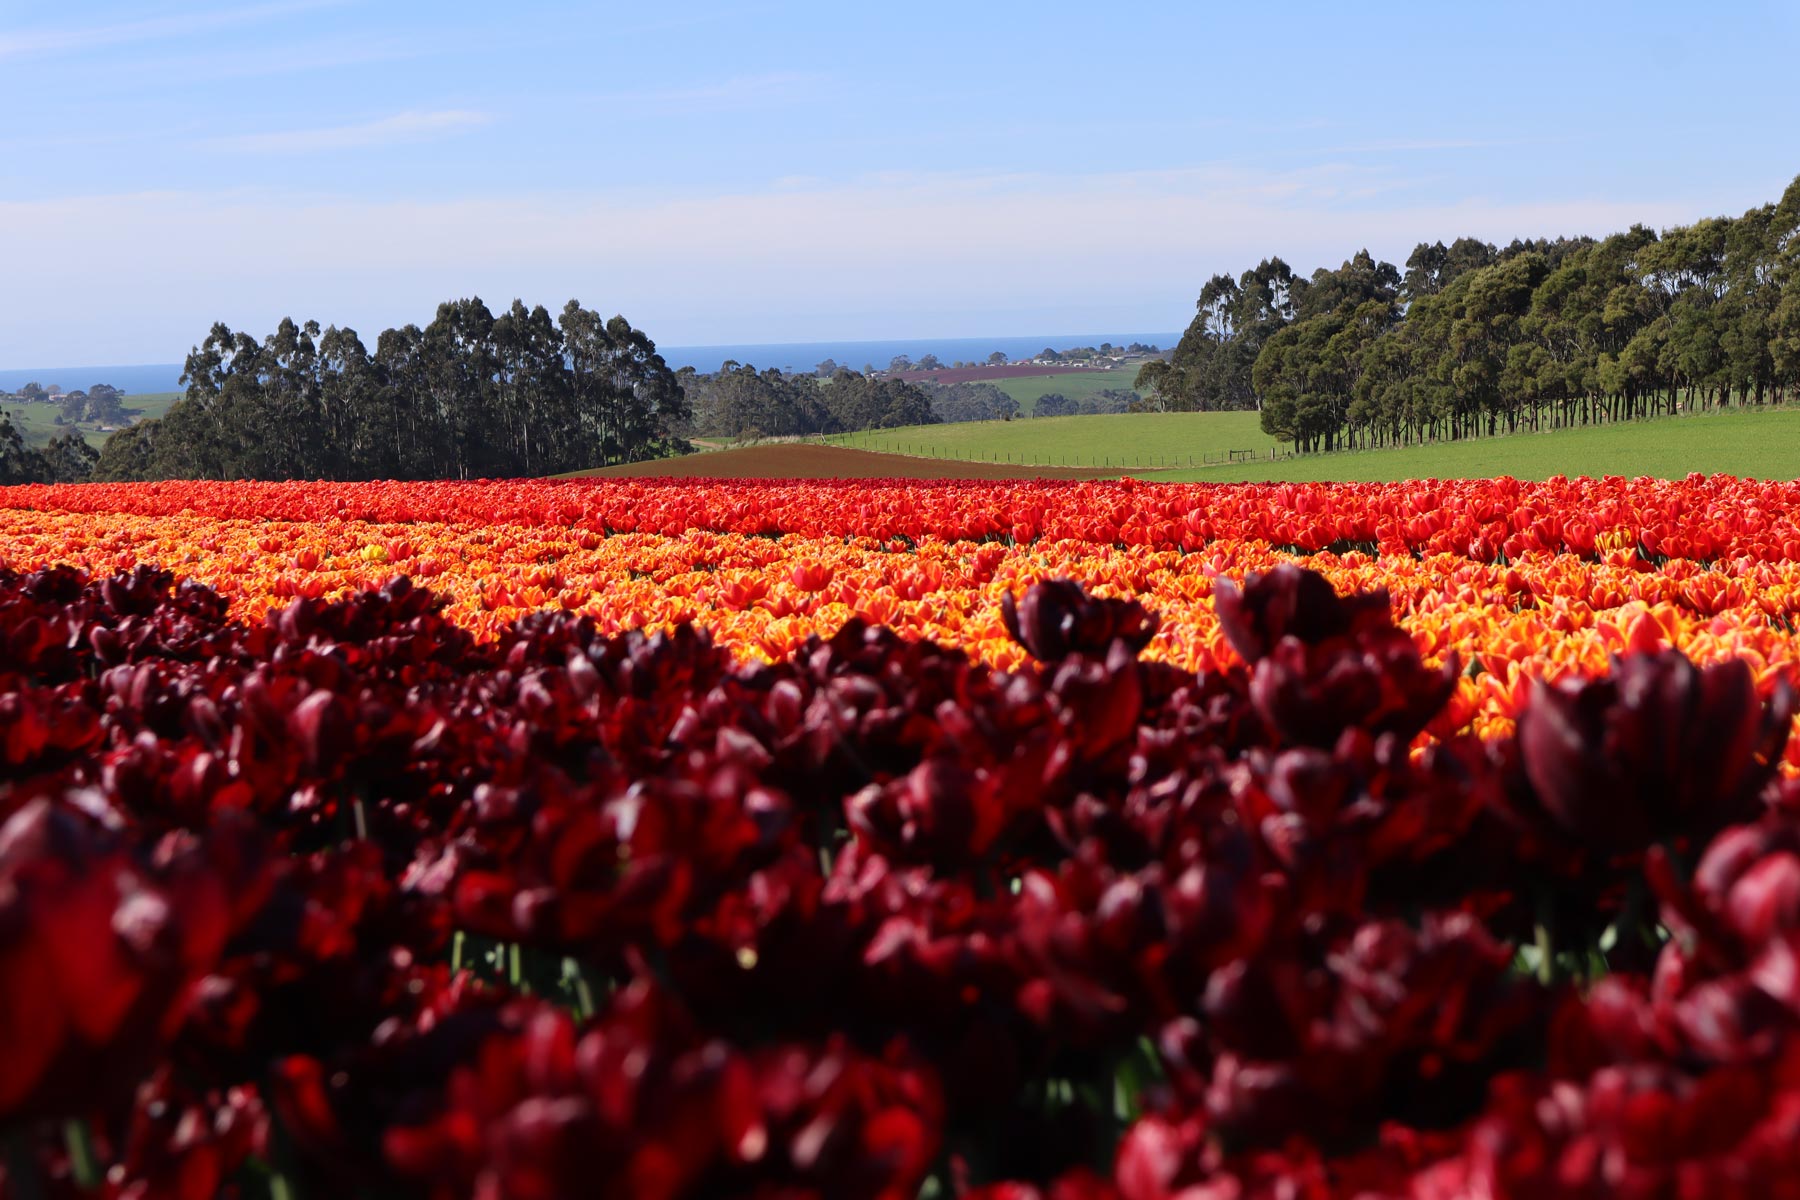 Coastline Tours invites you to explore North West Tasmania's blossoming beauty. Join our guided tours for an immersive experience among vibrant flowers, adding a touch of natural wonder to your journey.